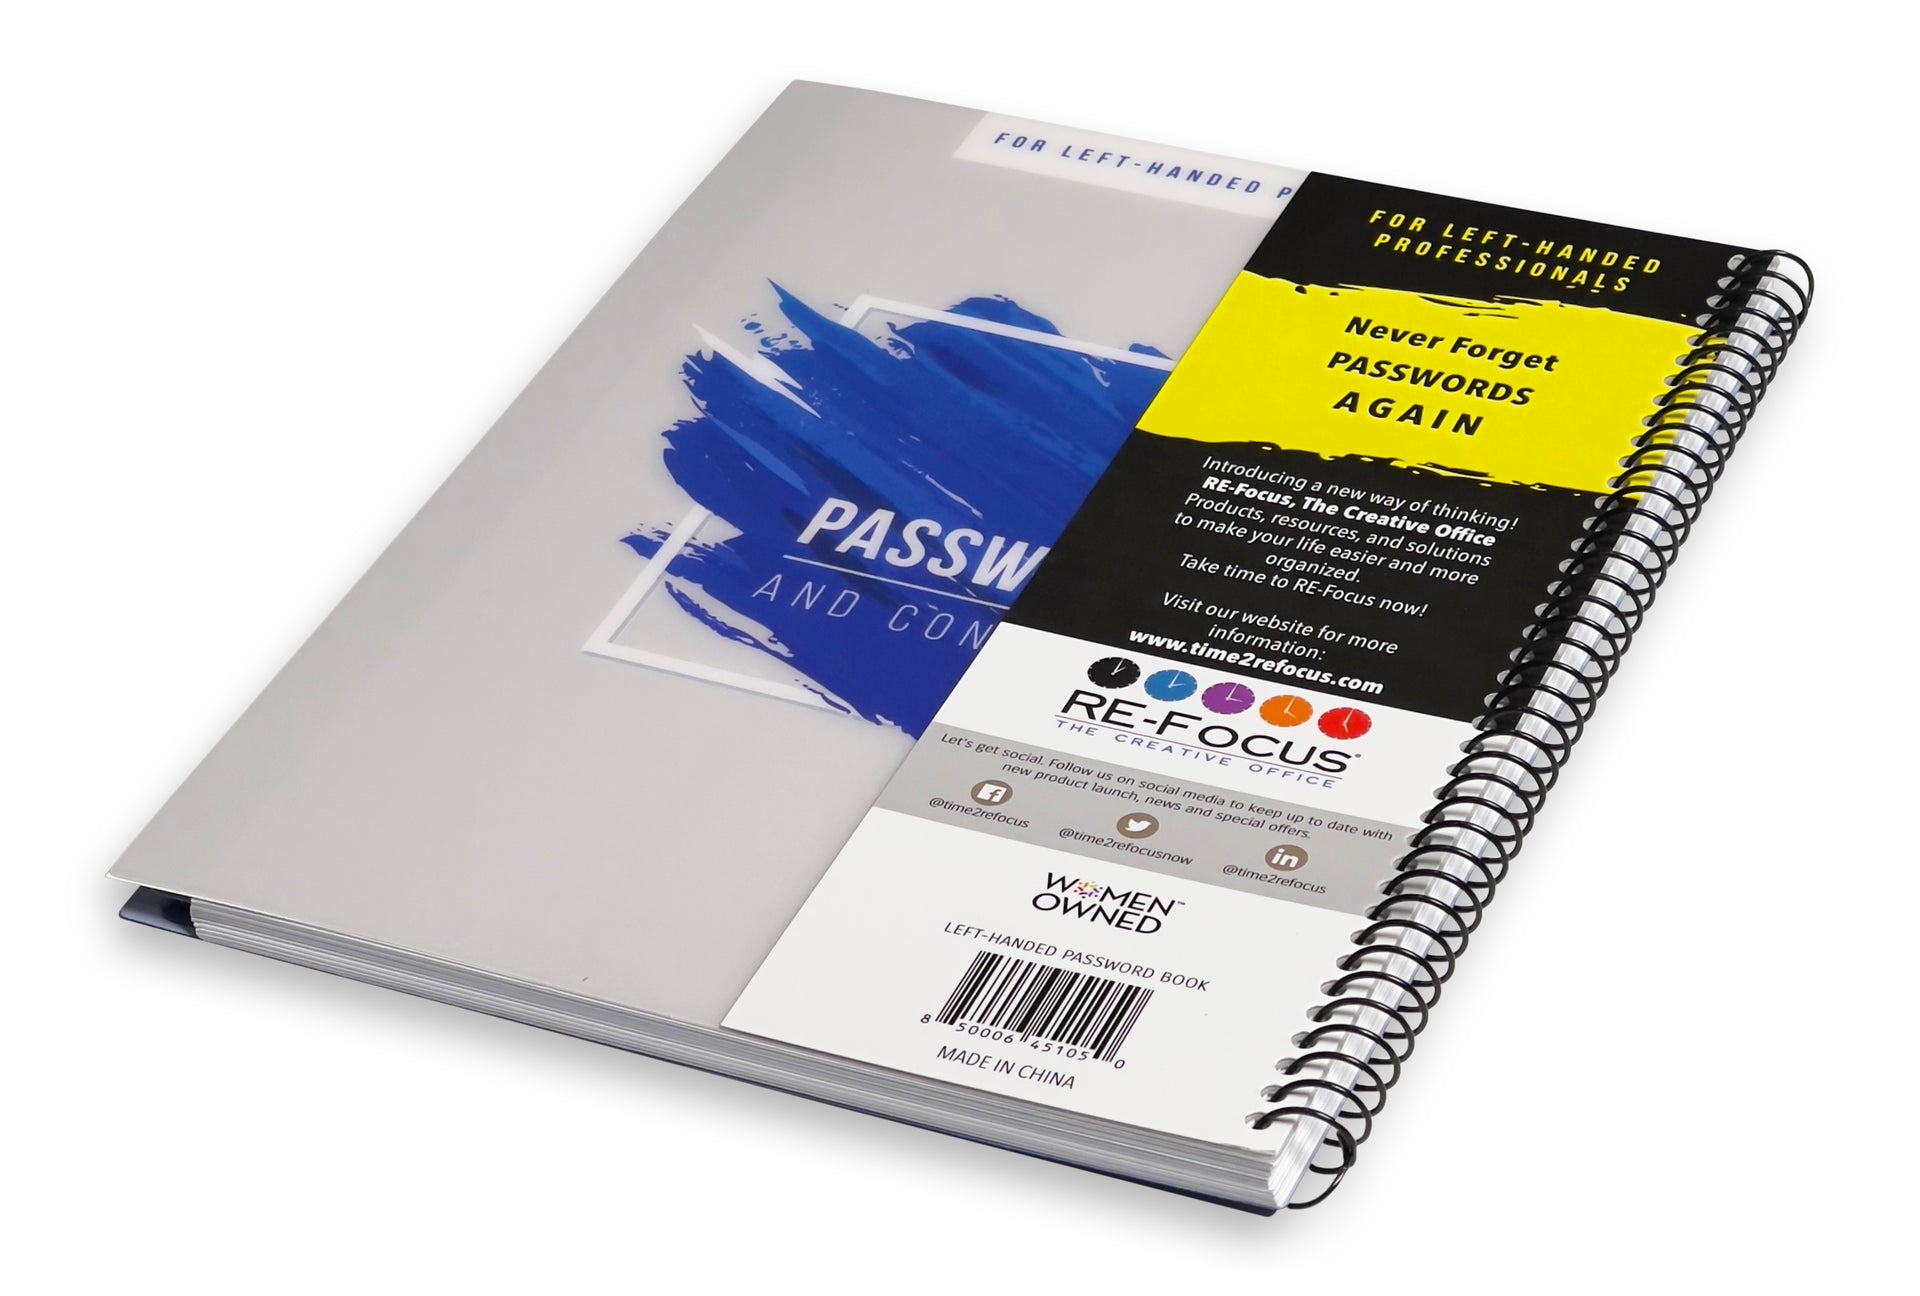 RE-FOCUS THE CREATIVE OFFICE, Left-Handed Large Password Keeper Book, Blue